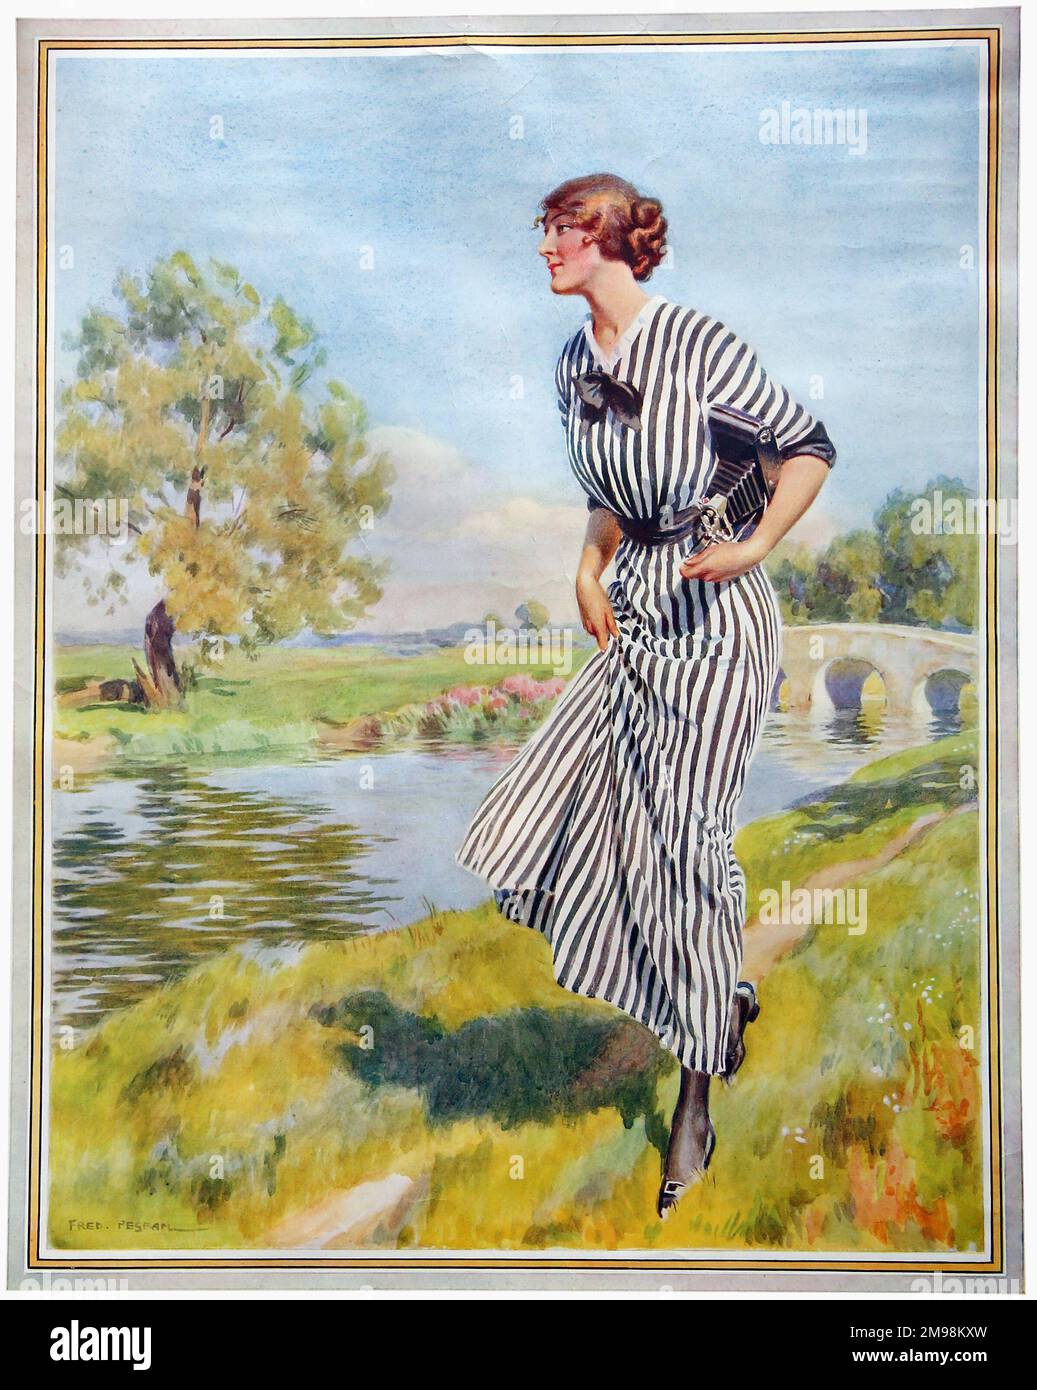 Poster Art, the Kodak Girl by a river in her distinctive black and white striped dress. Stock Photo